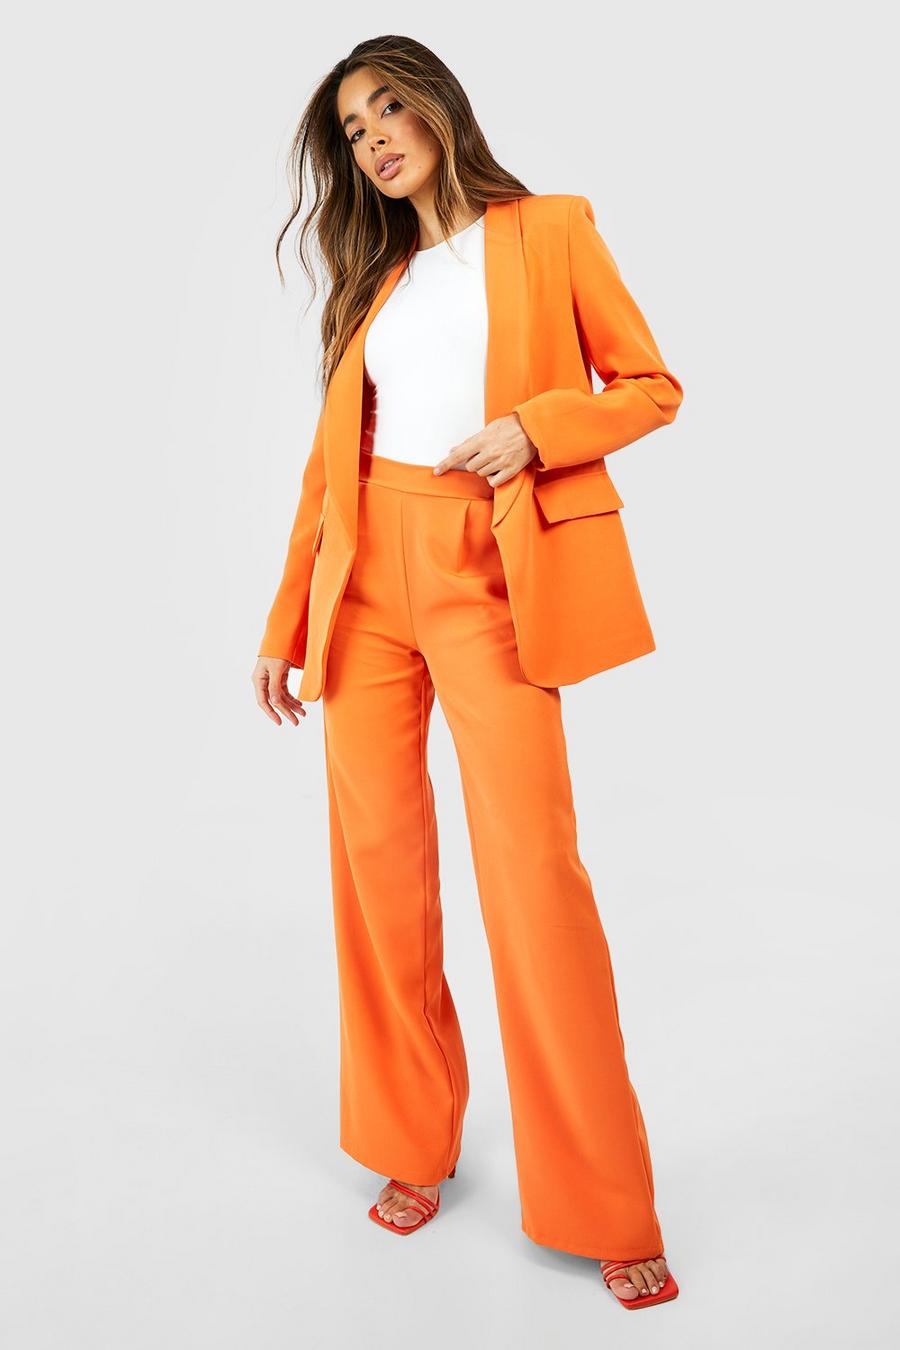 Orange Slouchy Relaxed Fit Wide Leg Dress Pants